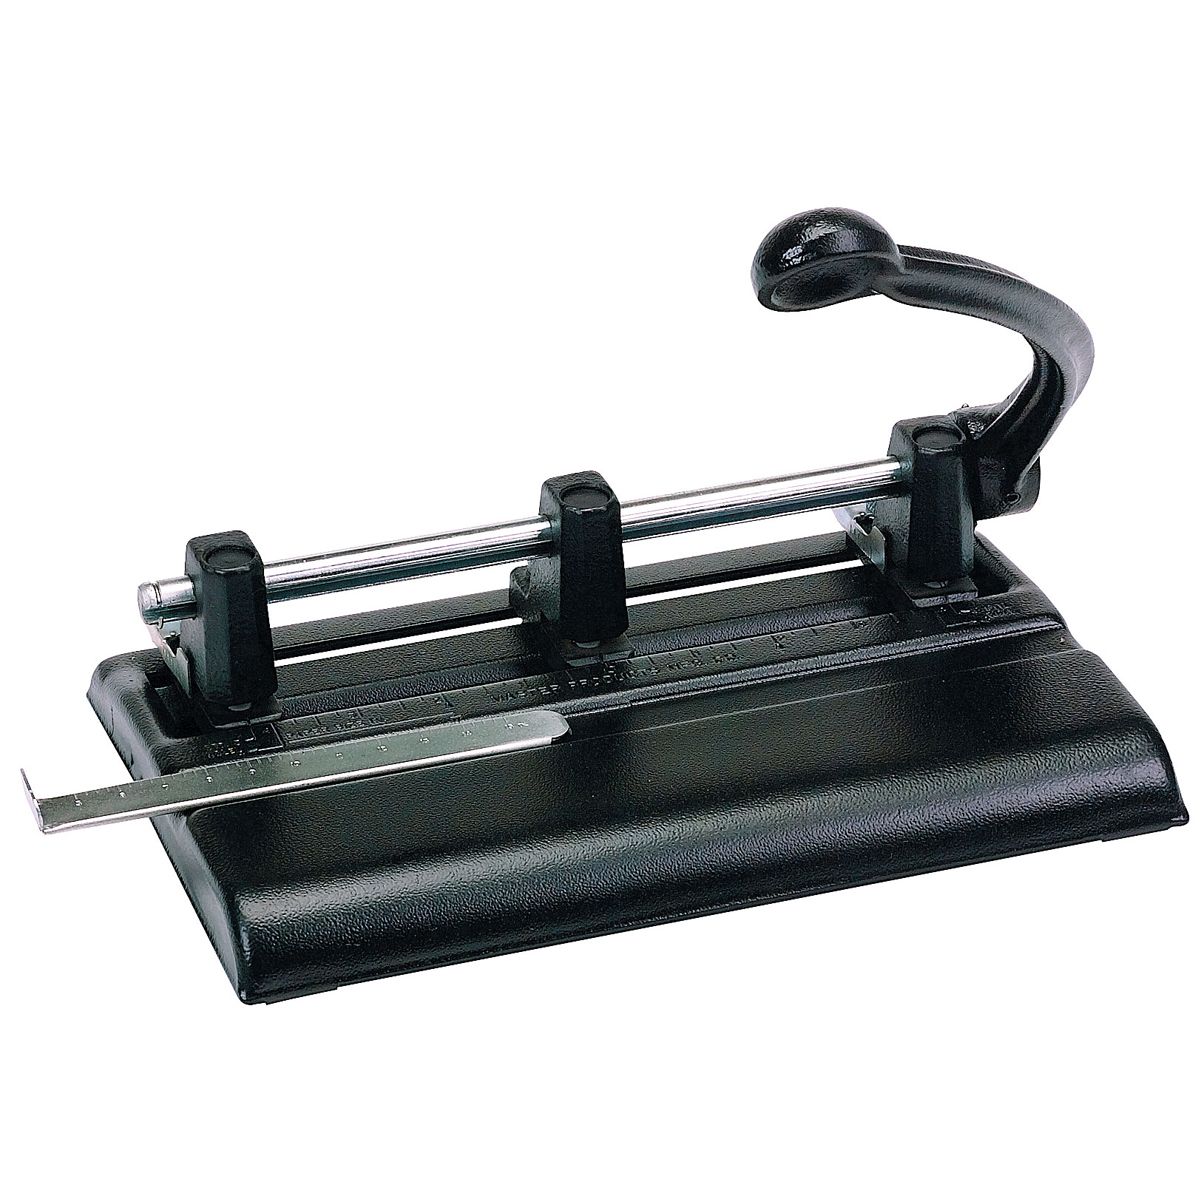 Swingline® Heavy-Duty 3-Hole Punch 11/32 Punch Size with 40 Sheet Capacity